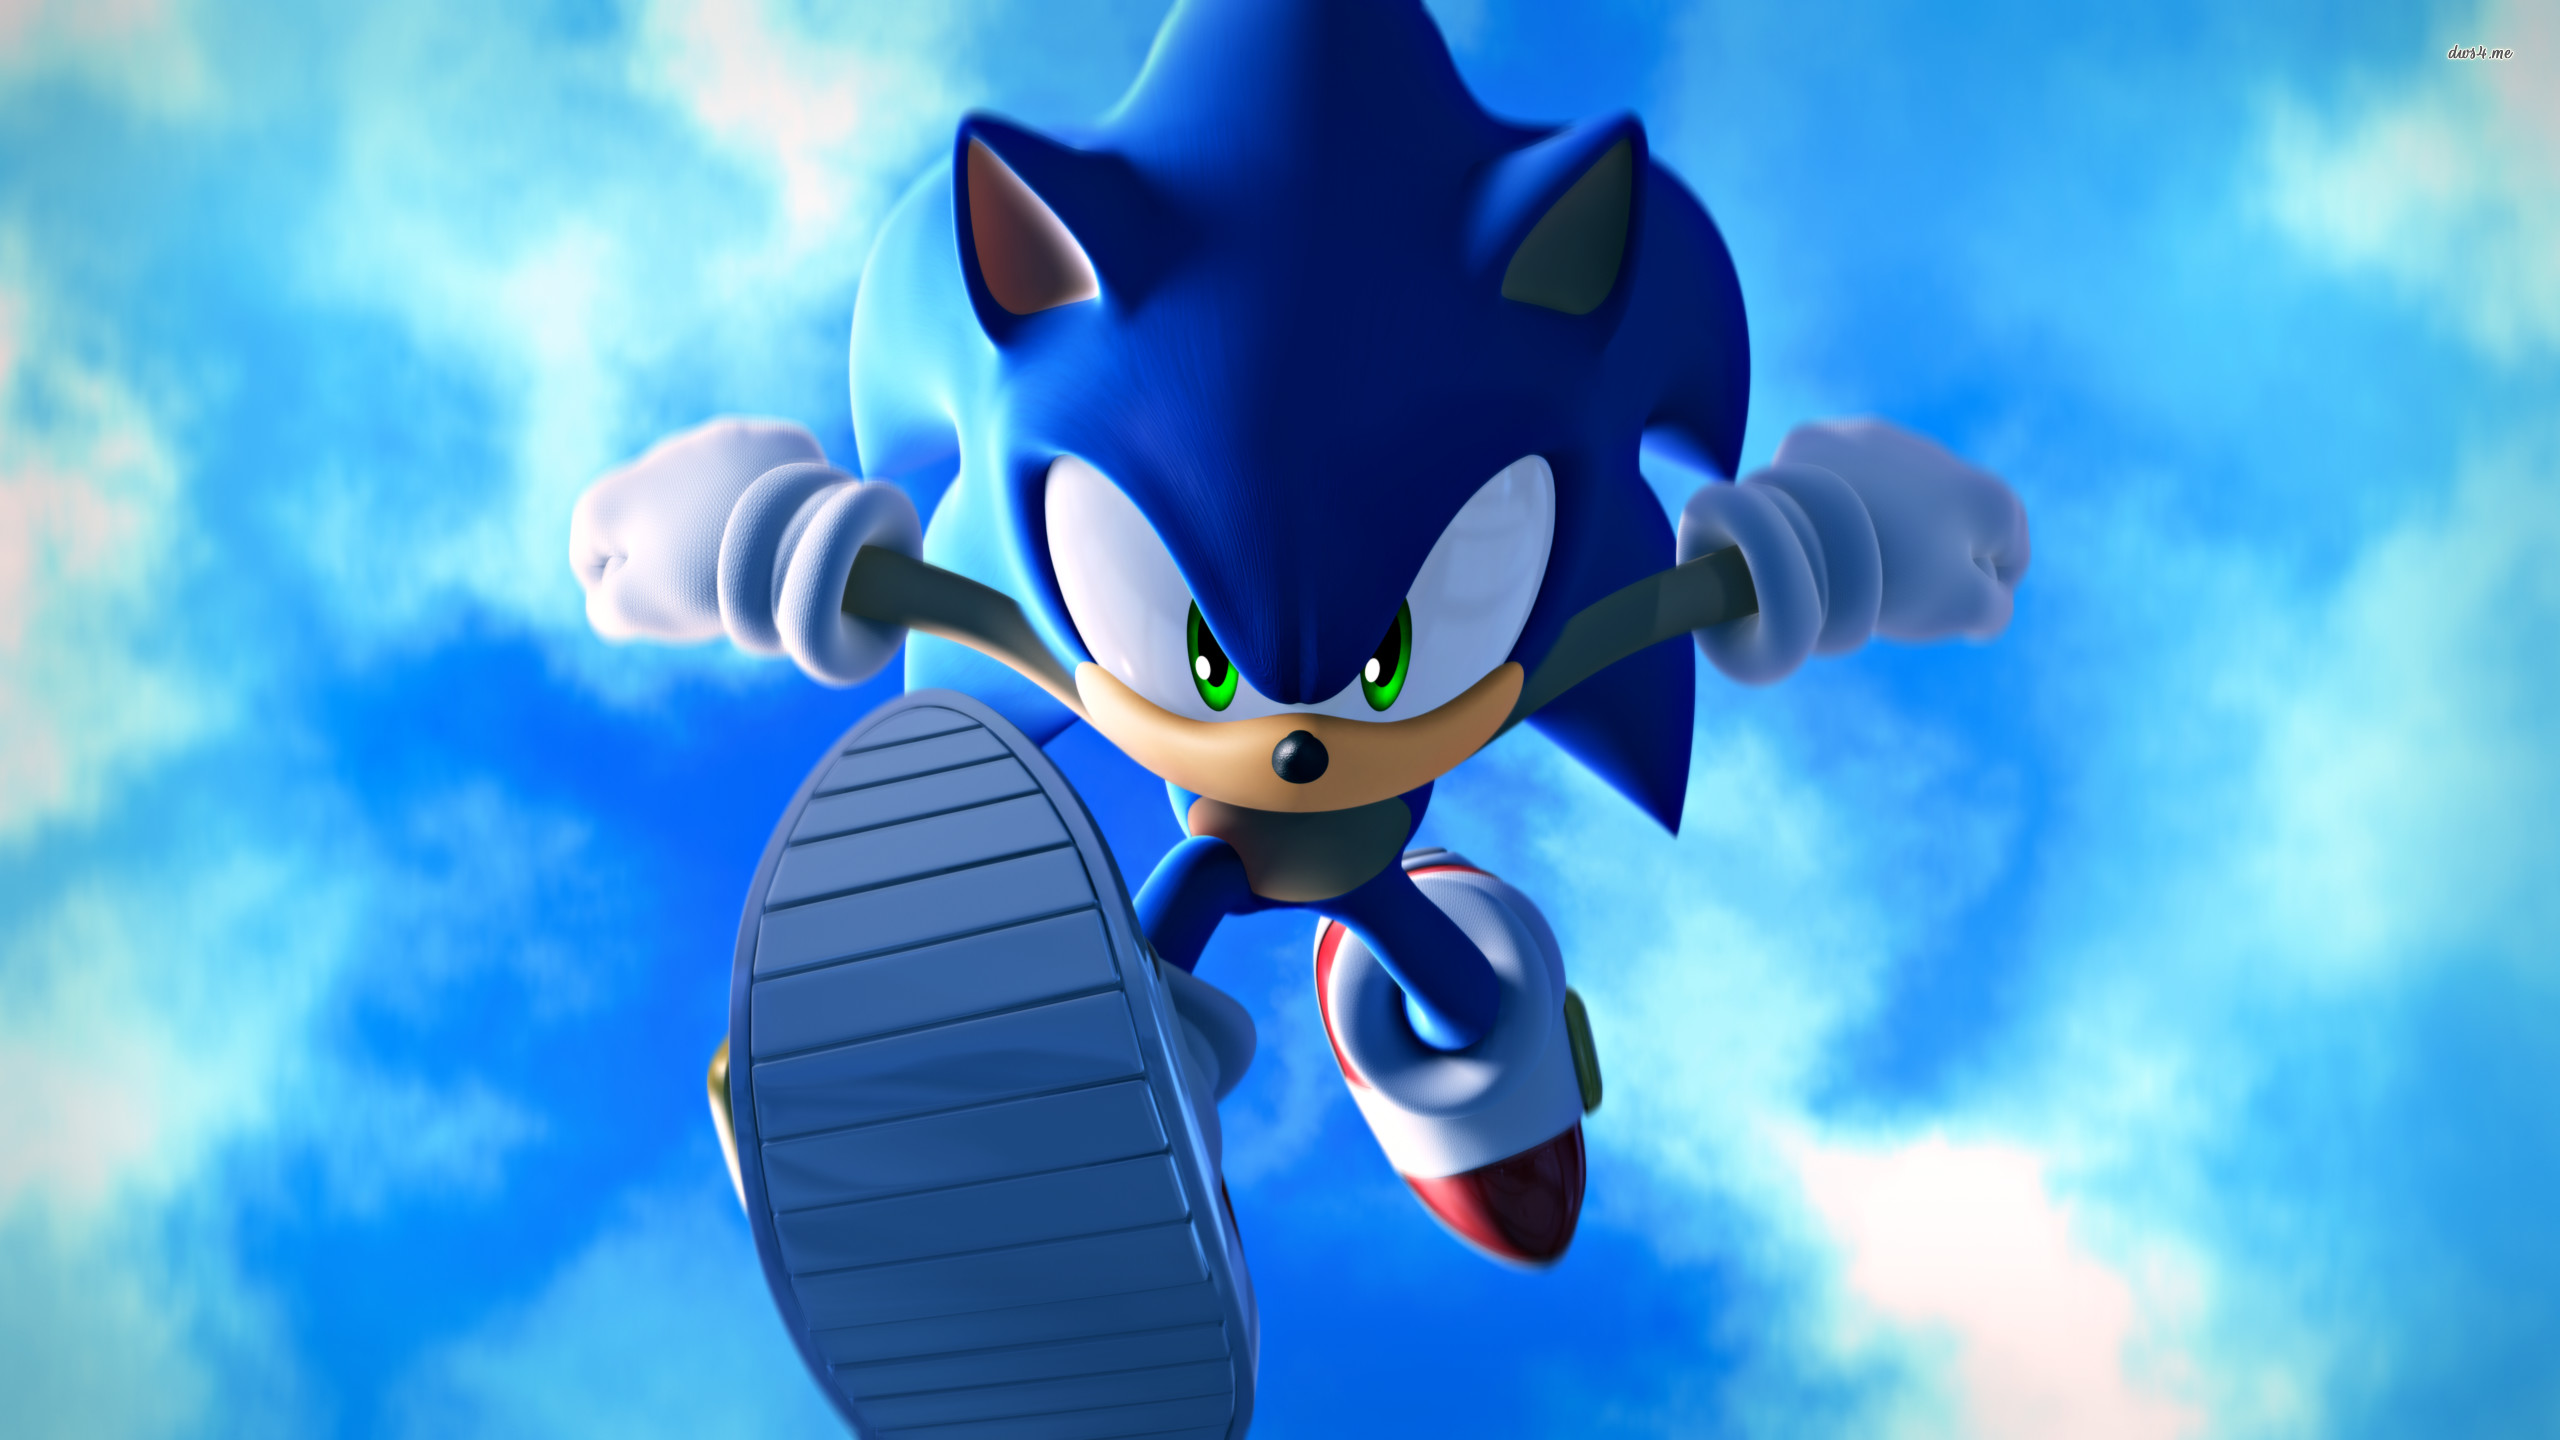 2560x1440 AVW-29: HD Sonic Wallpaper 1080p, Pictures of Sonic 1080p .